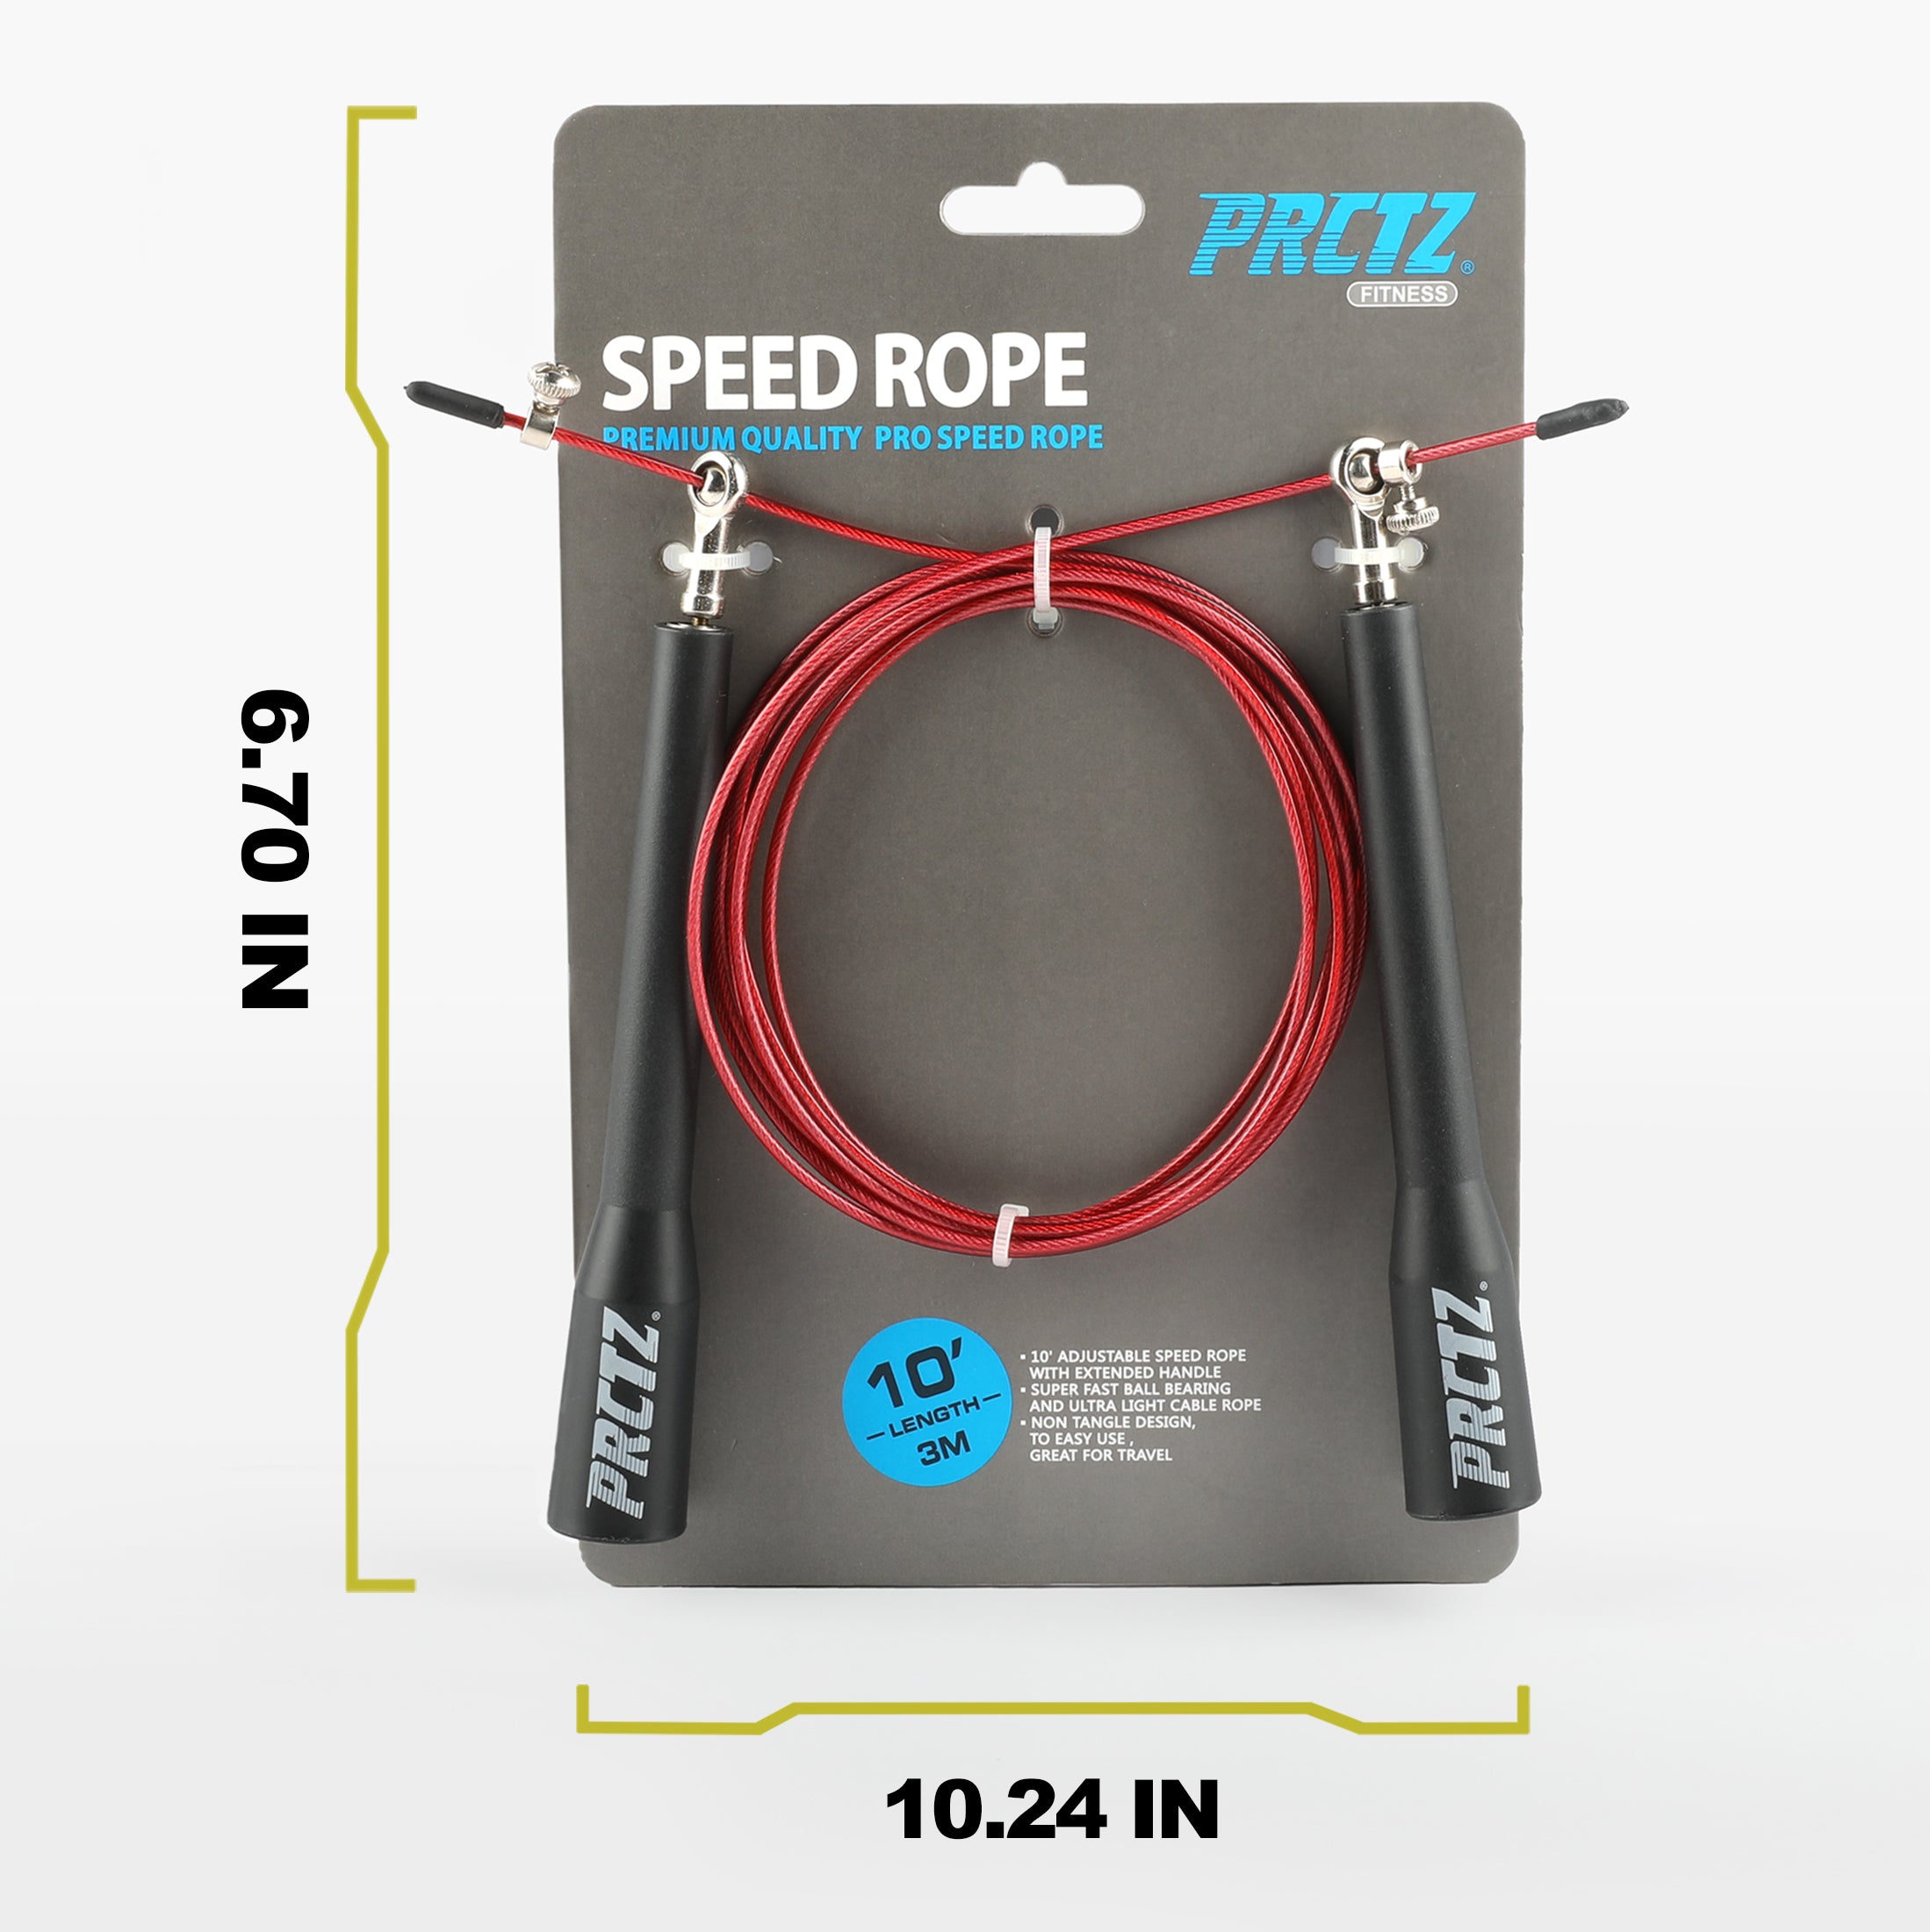 Fitness 10ft Jump Rope 